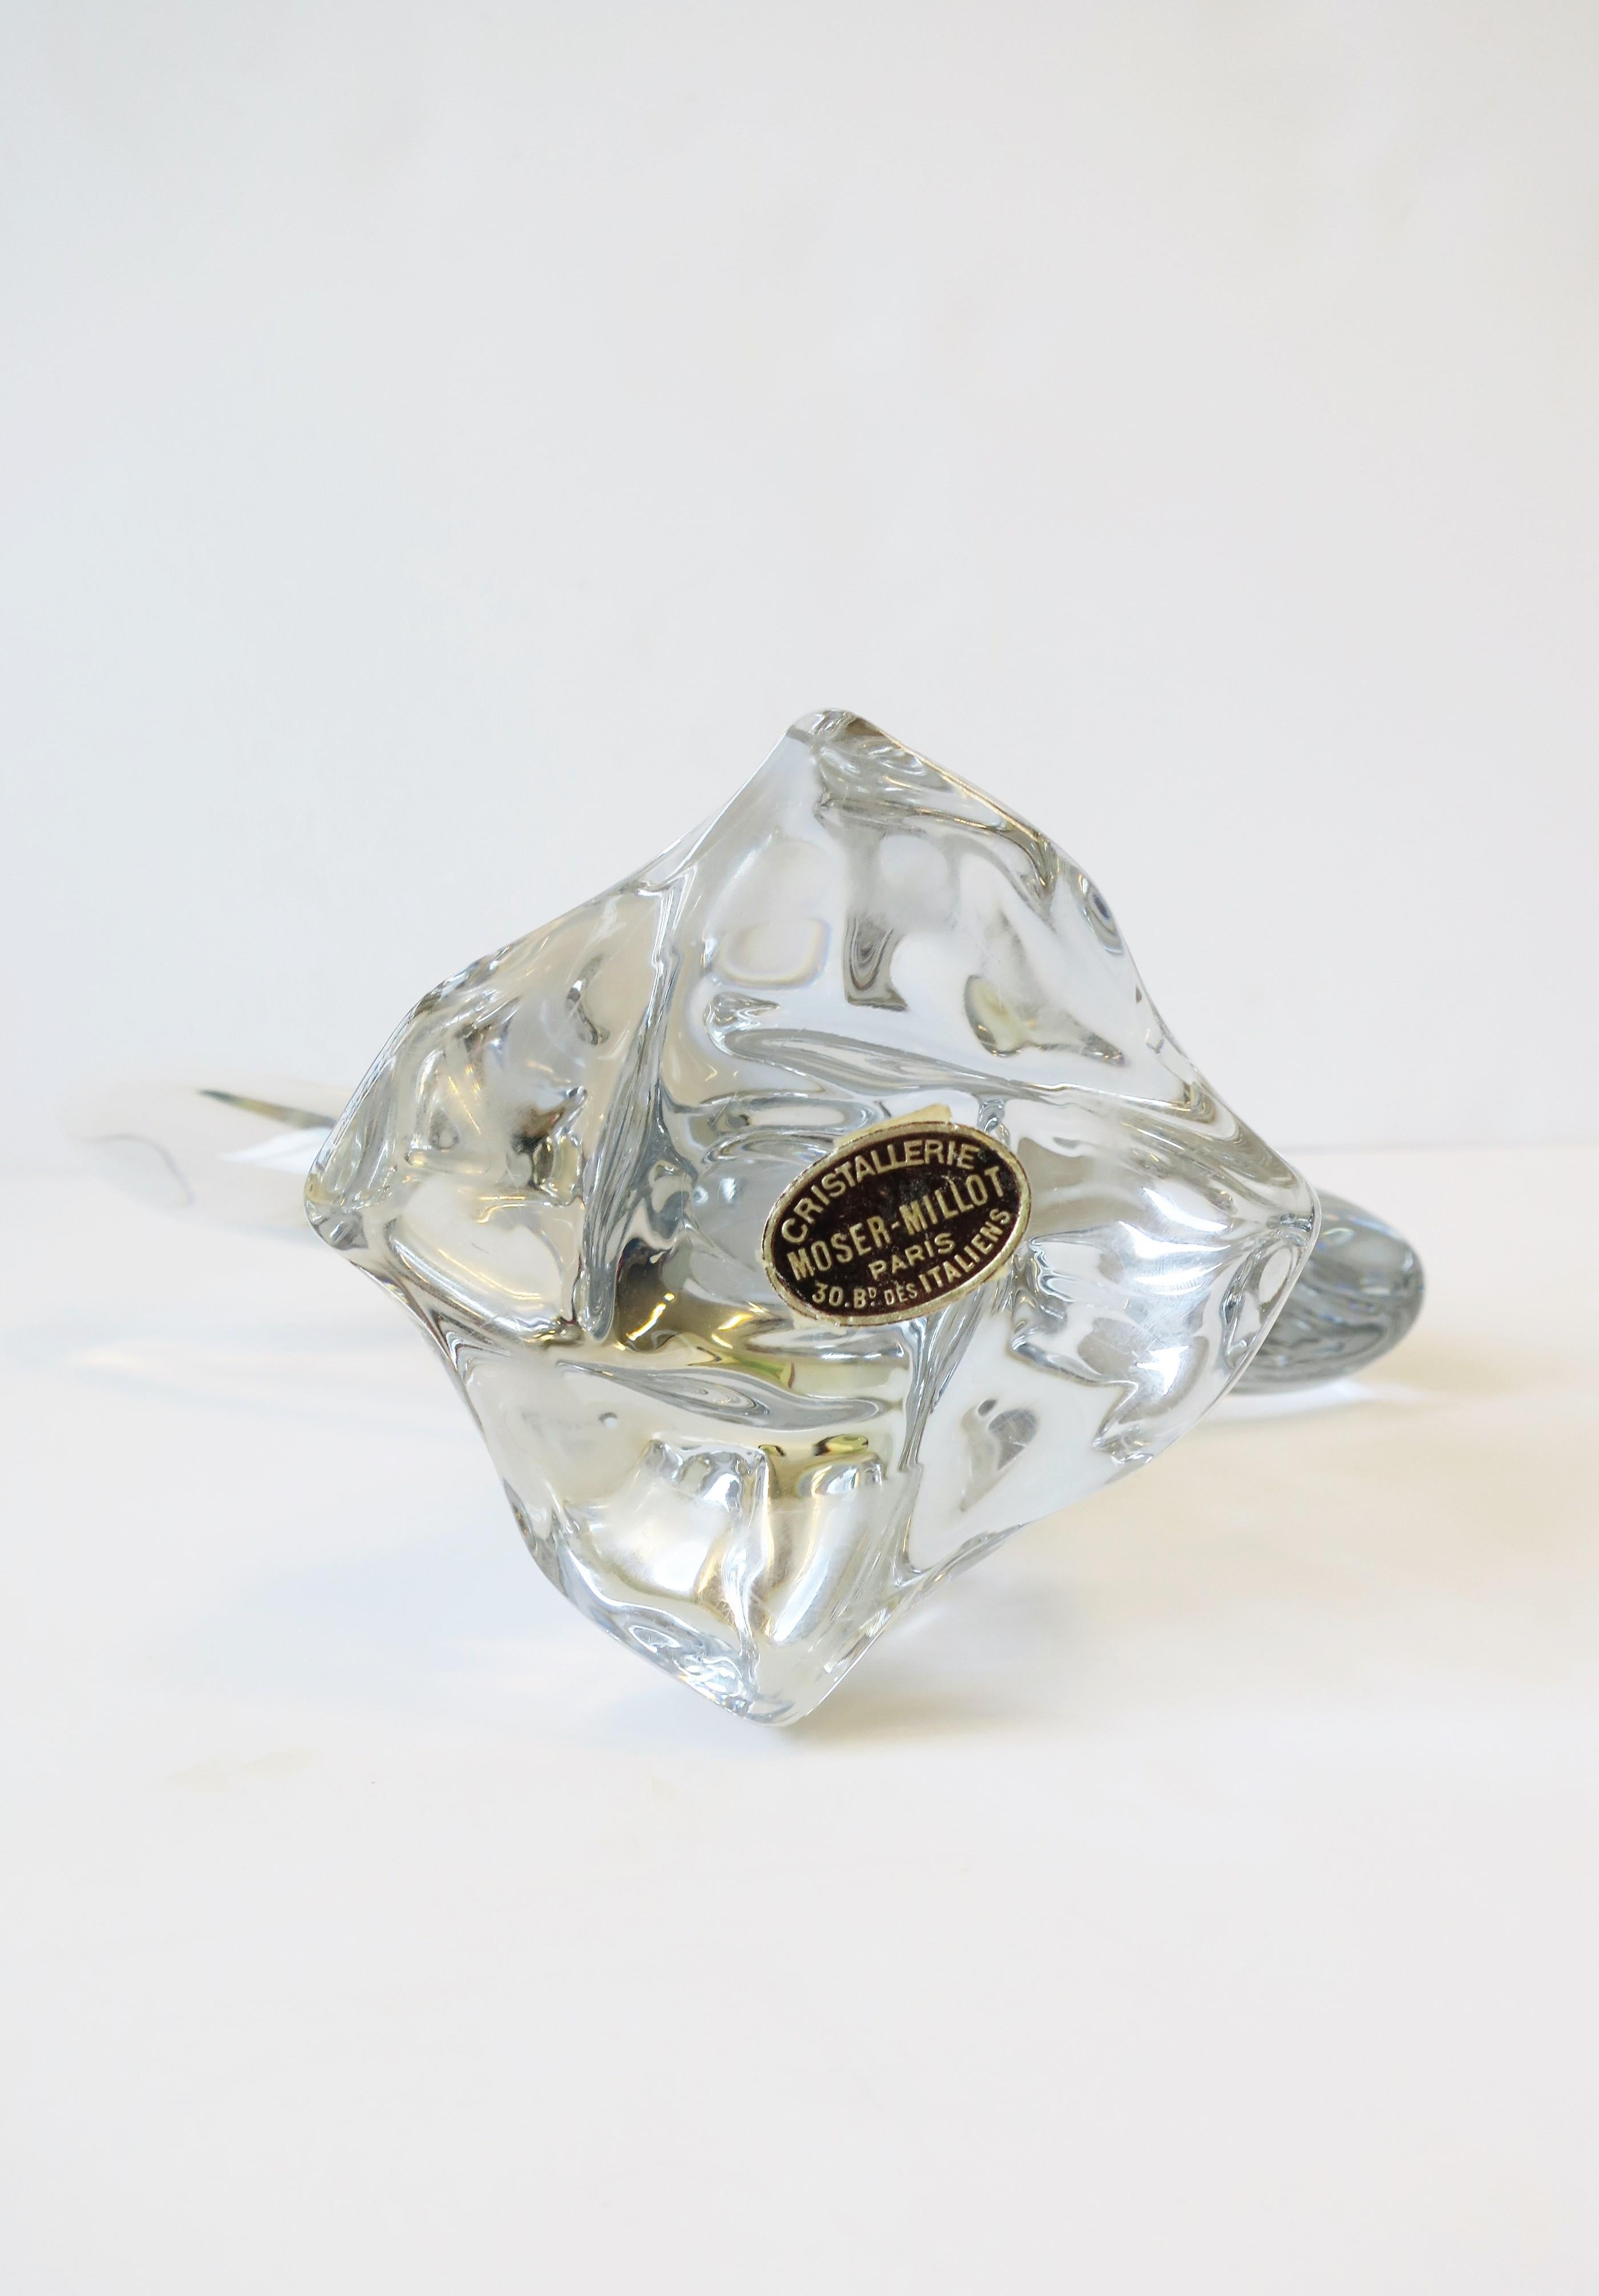 French Moser-Millot Crystal Art Glass Fish Sculpture Decorative Object  For Sale 7